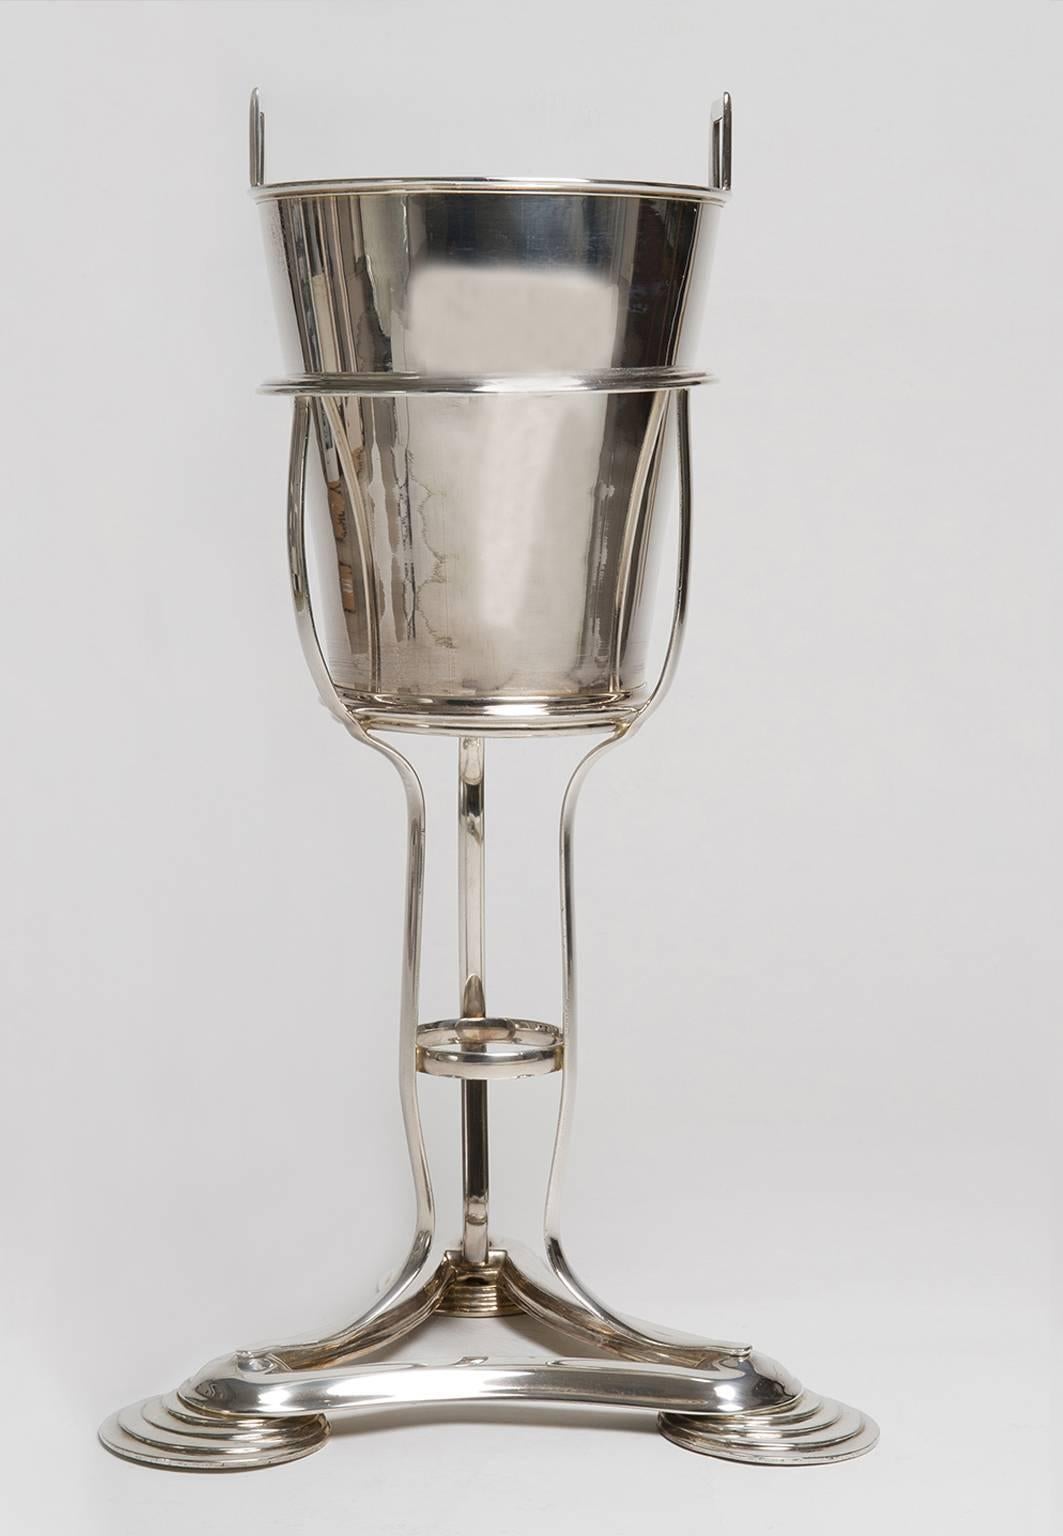 O/6838, charming and old pair of silver plated ;champagne or ice buckets, by Walker & Hall - USA - about 1930 -